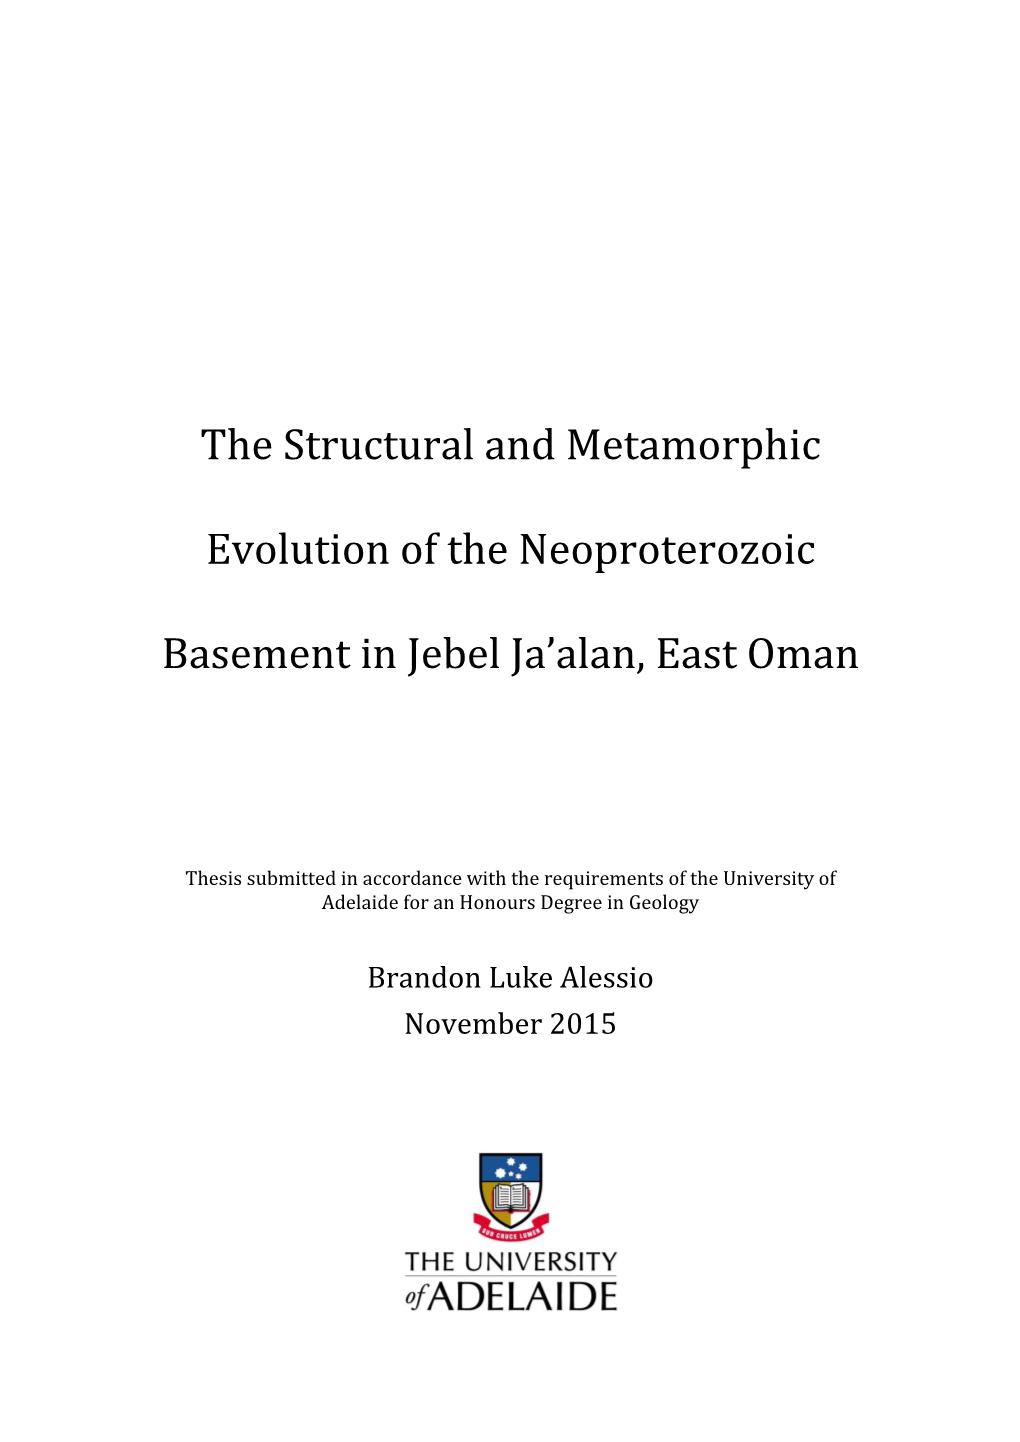 The Structural and Metamorphic Evolution of the Neoproterozoic Basement in Jebel Ja’Alan, East Oman